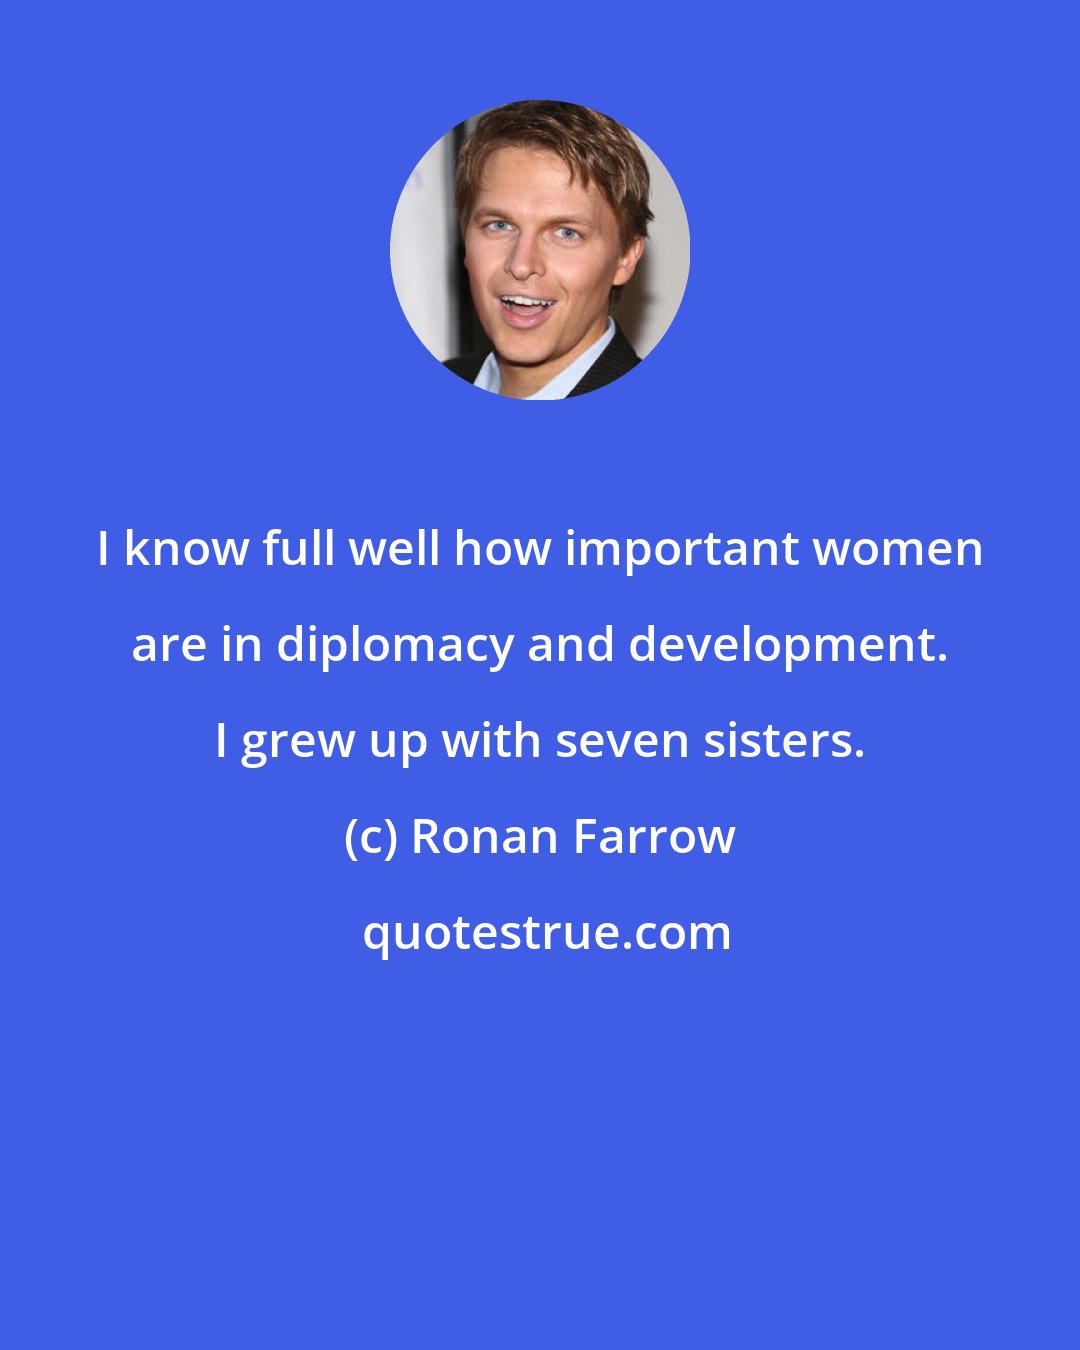 Ronan Farrow: I know full well how important women are in diplomacy and development. I grew up with seven sisters.